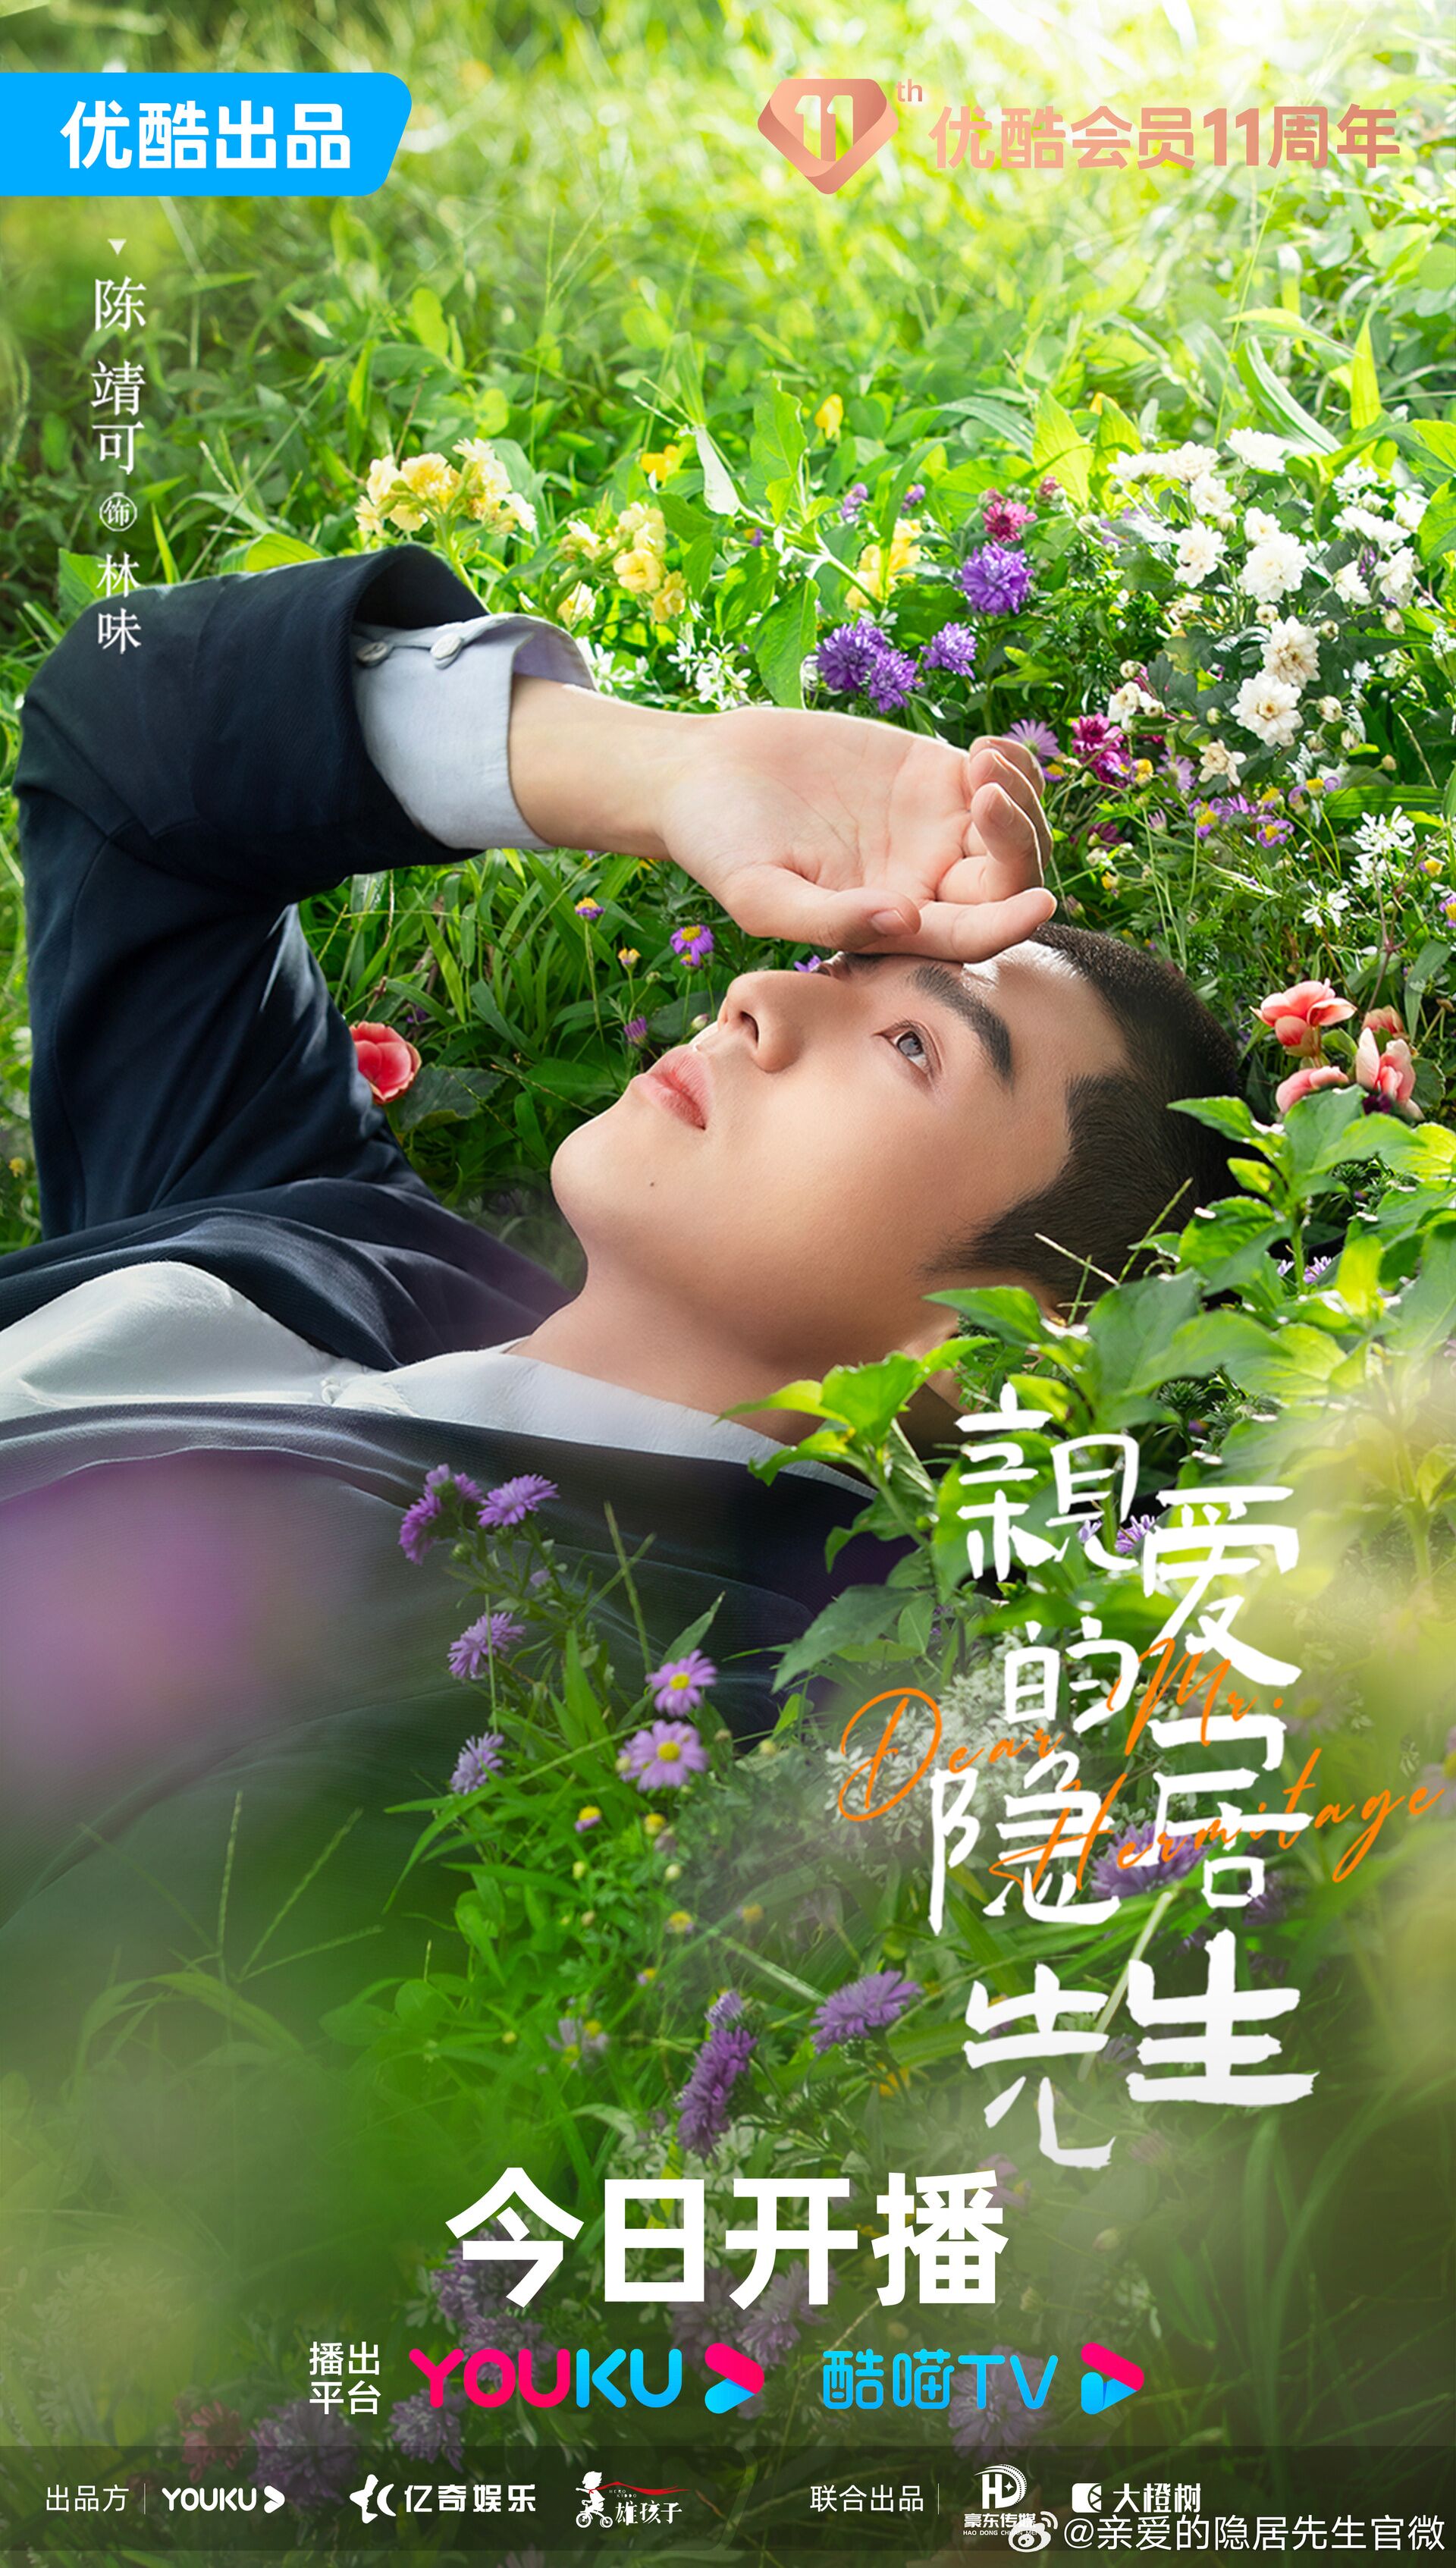 Dear Mr. Recluse Photo with Chen Jingke, HD Image, Wallpaper - CPOP HOME